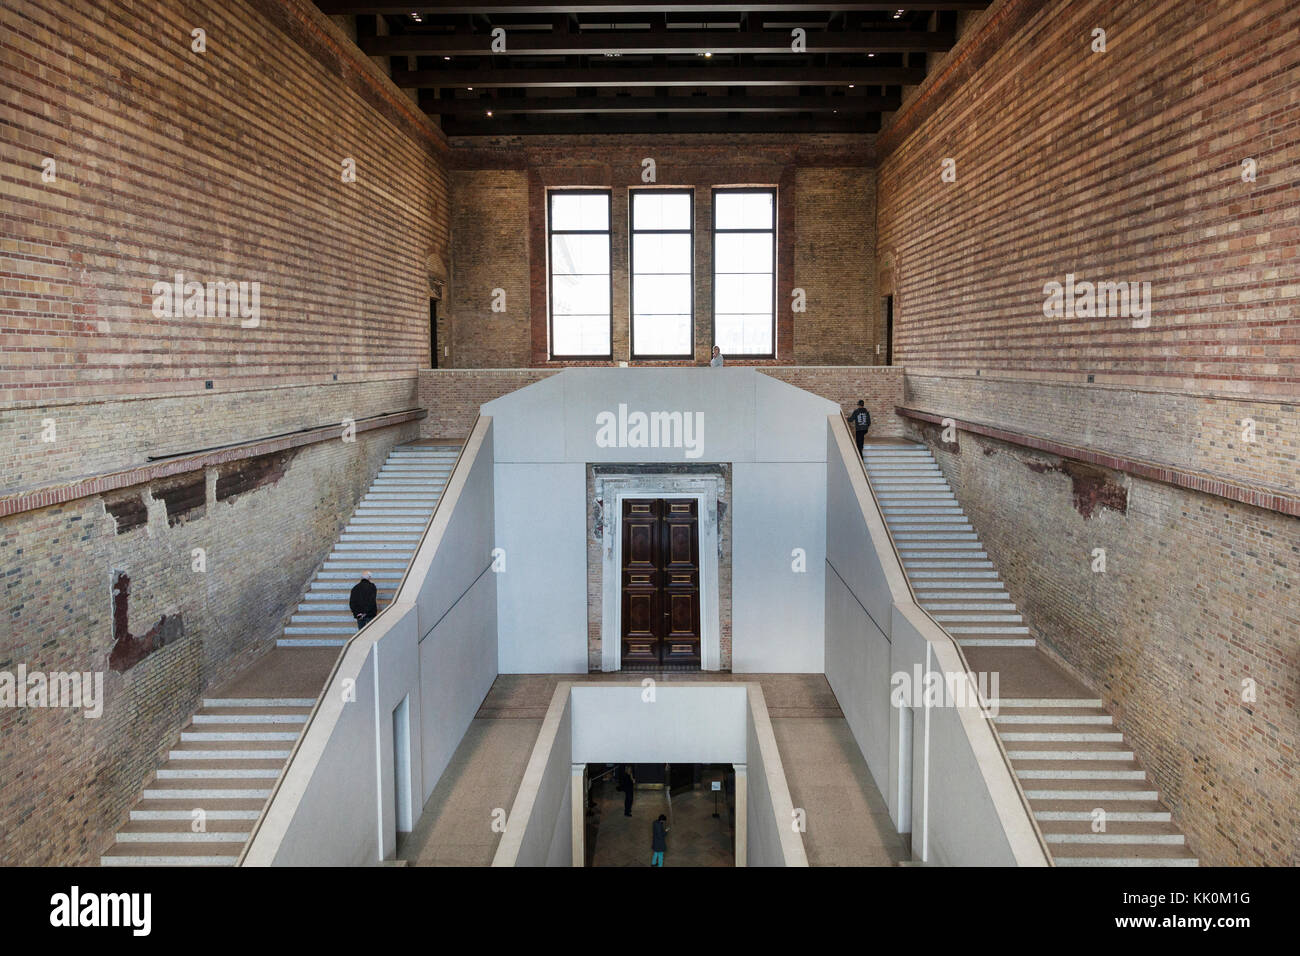 Interior of the Neues Museum, Berlin, Germany Stock Photo